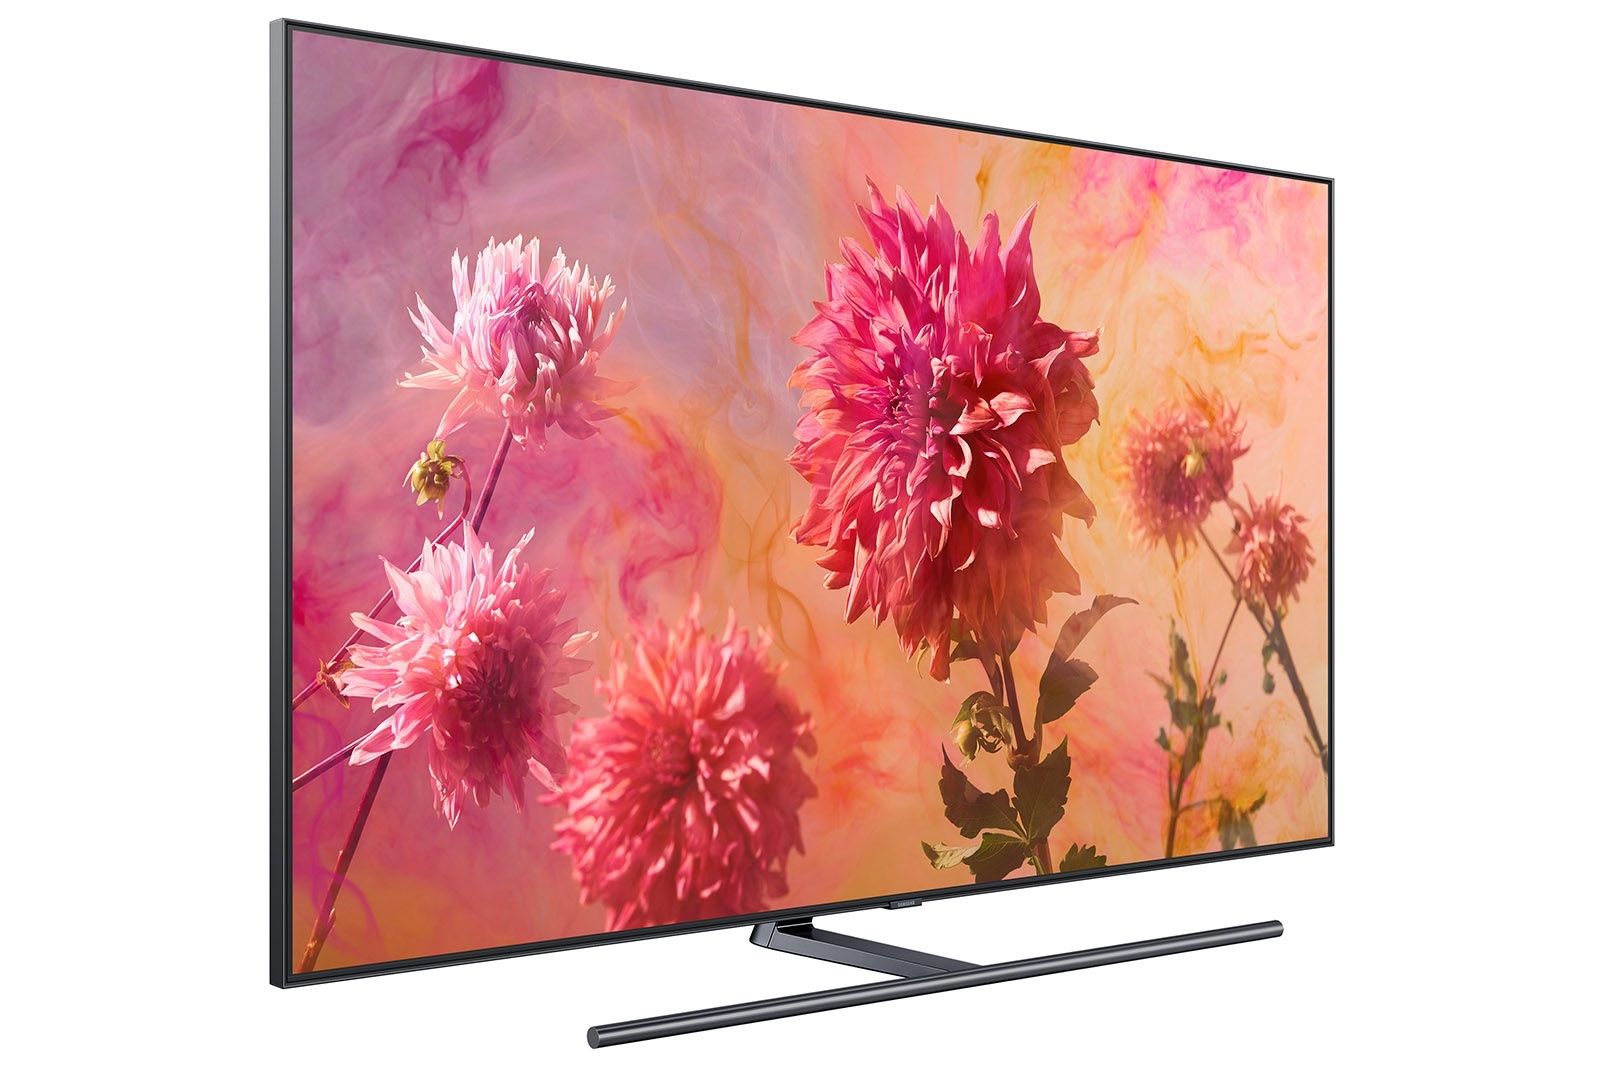 Samsung Q9FN QLED TV review image 4